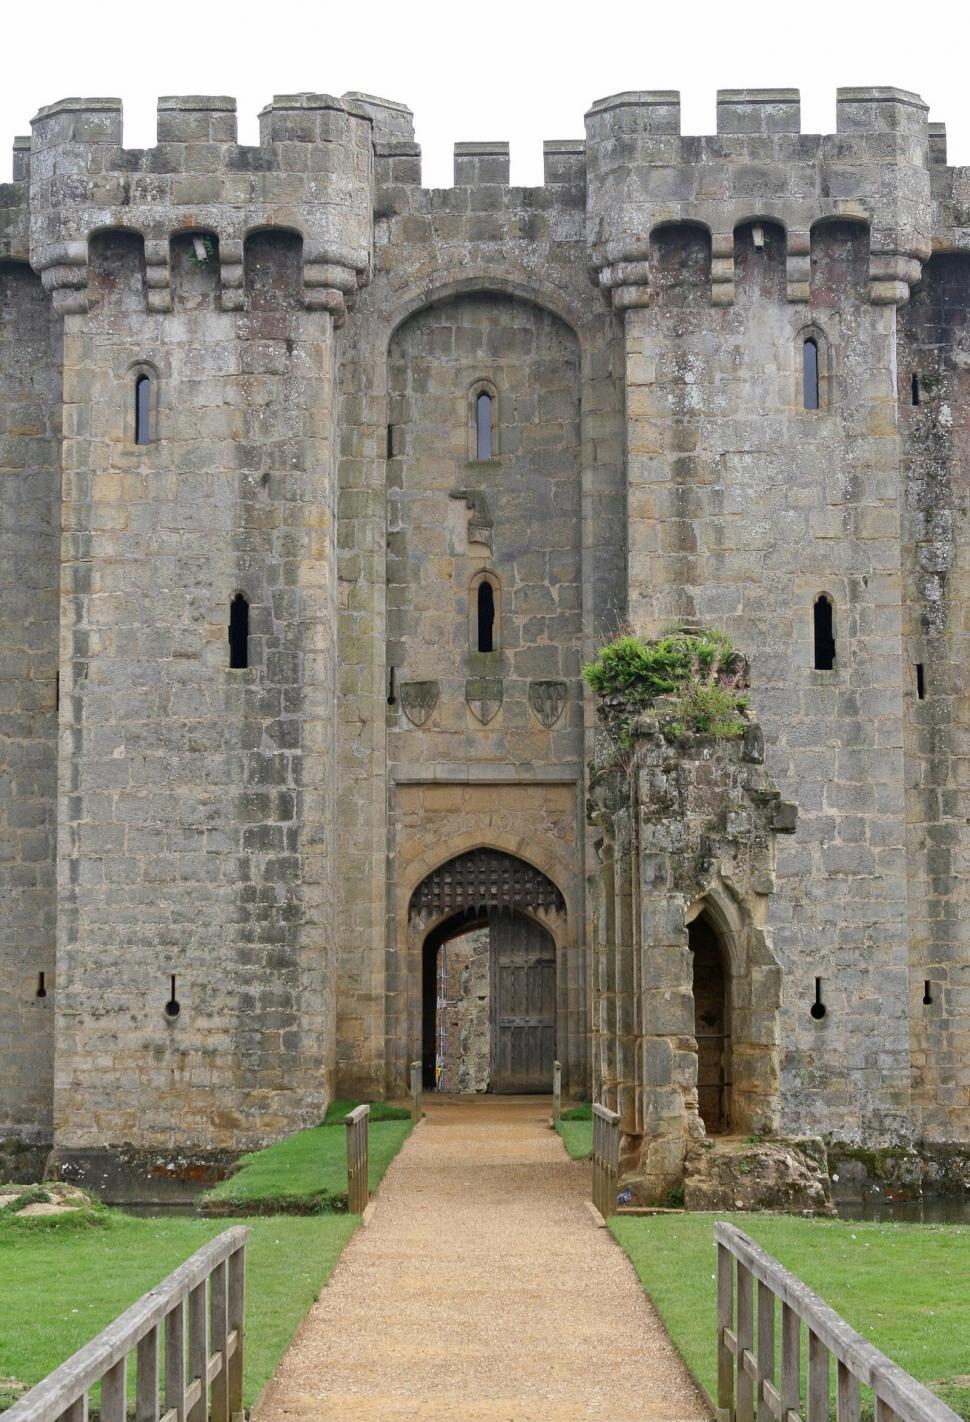 Free Image of Stone Castle With Walkway 